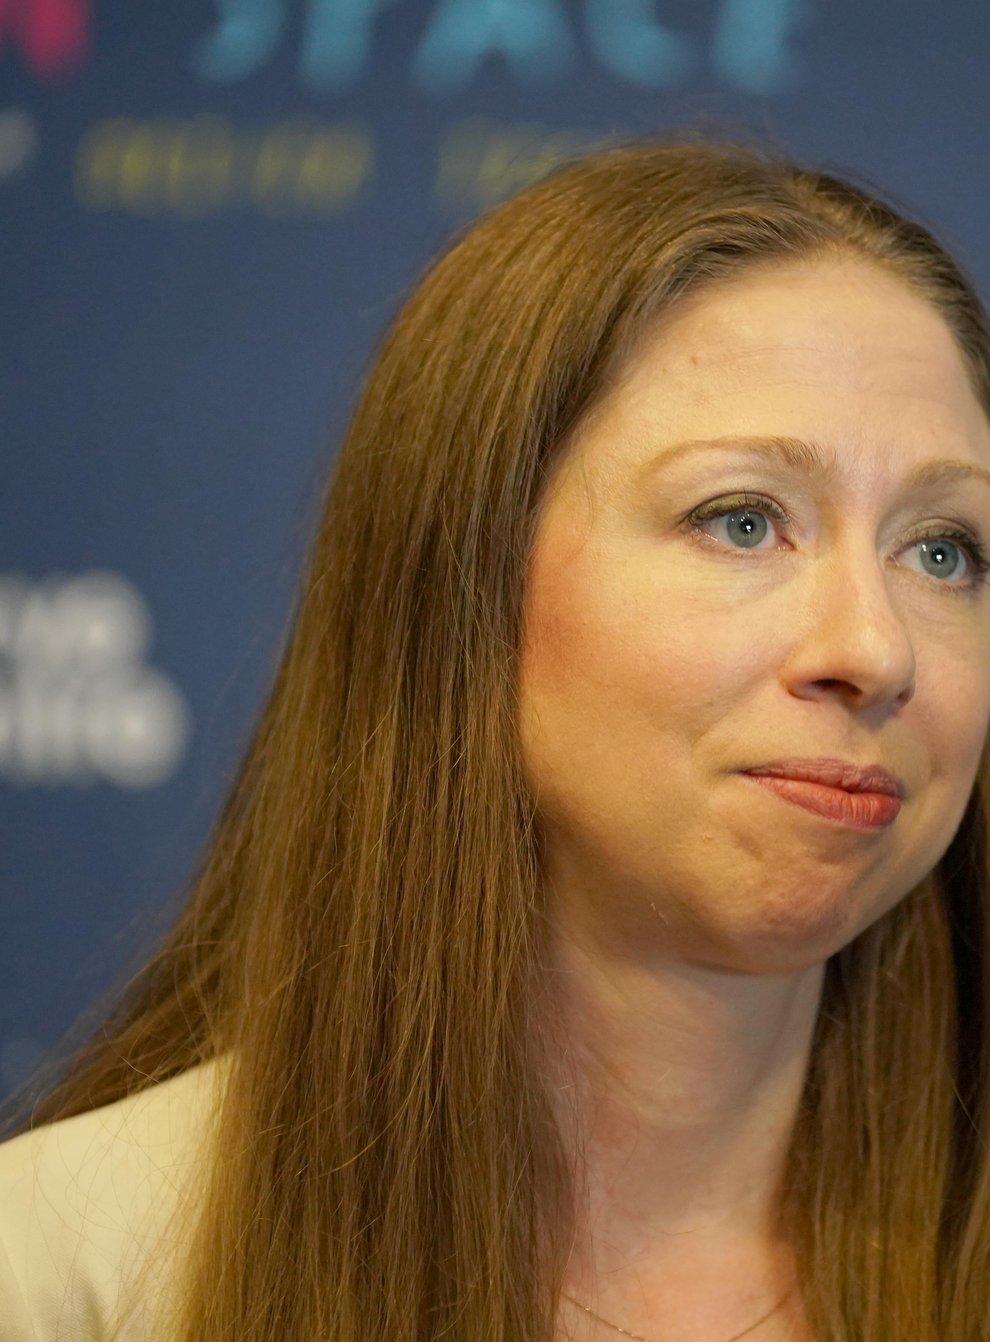 Chelsea Clinton in conversation at the Lyric Theatre in Belfast (PA)